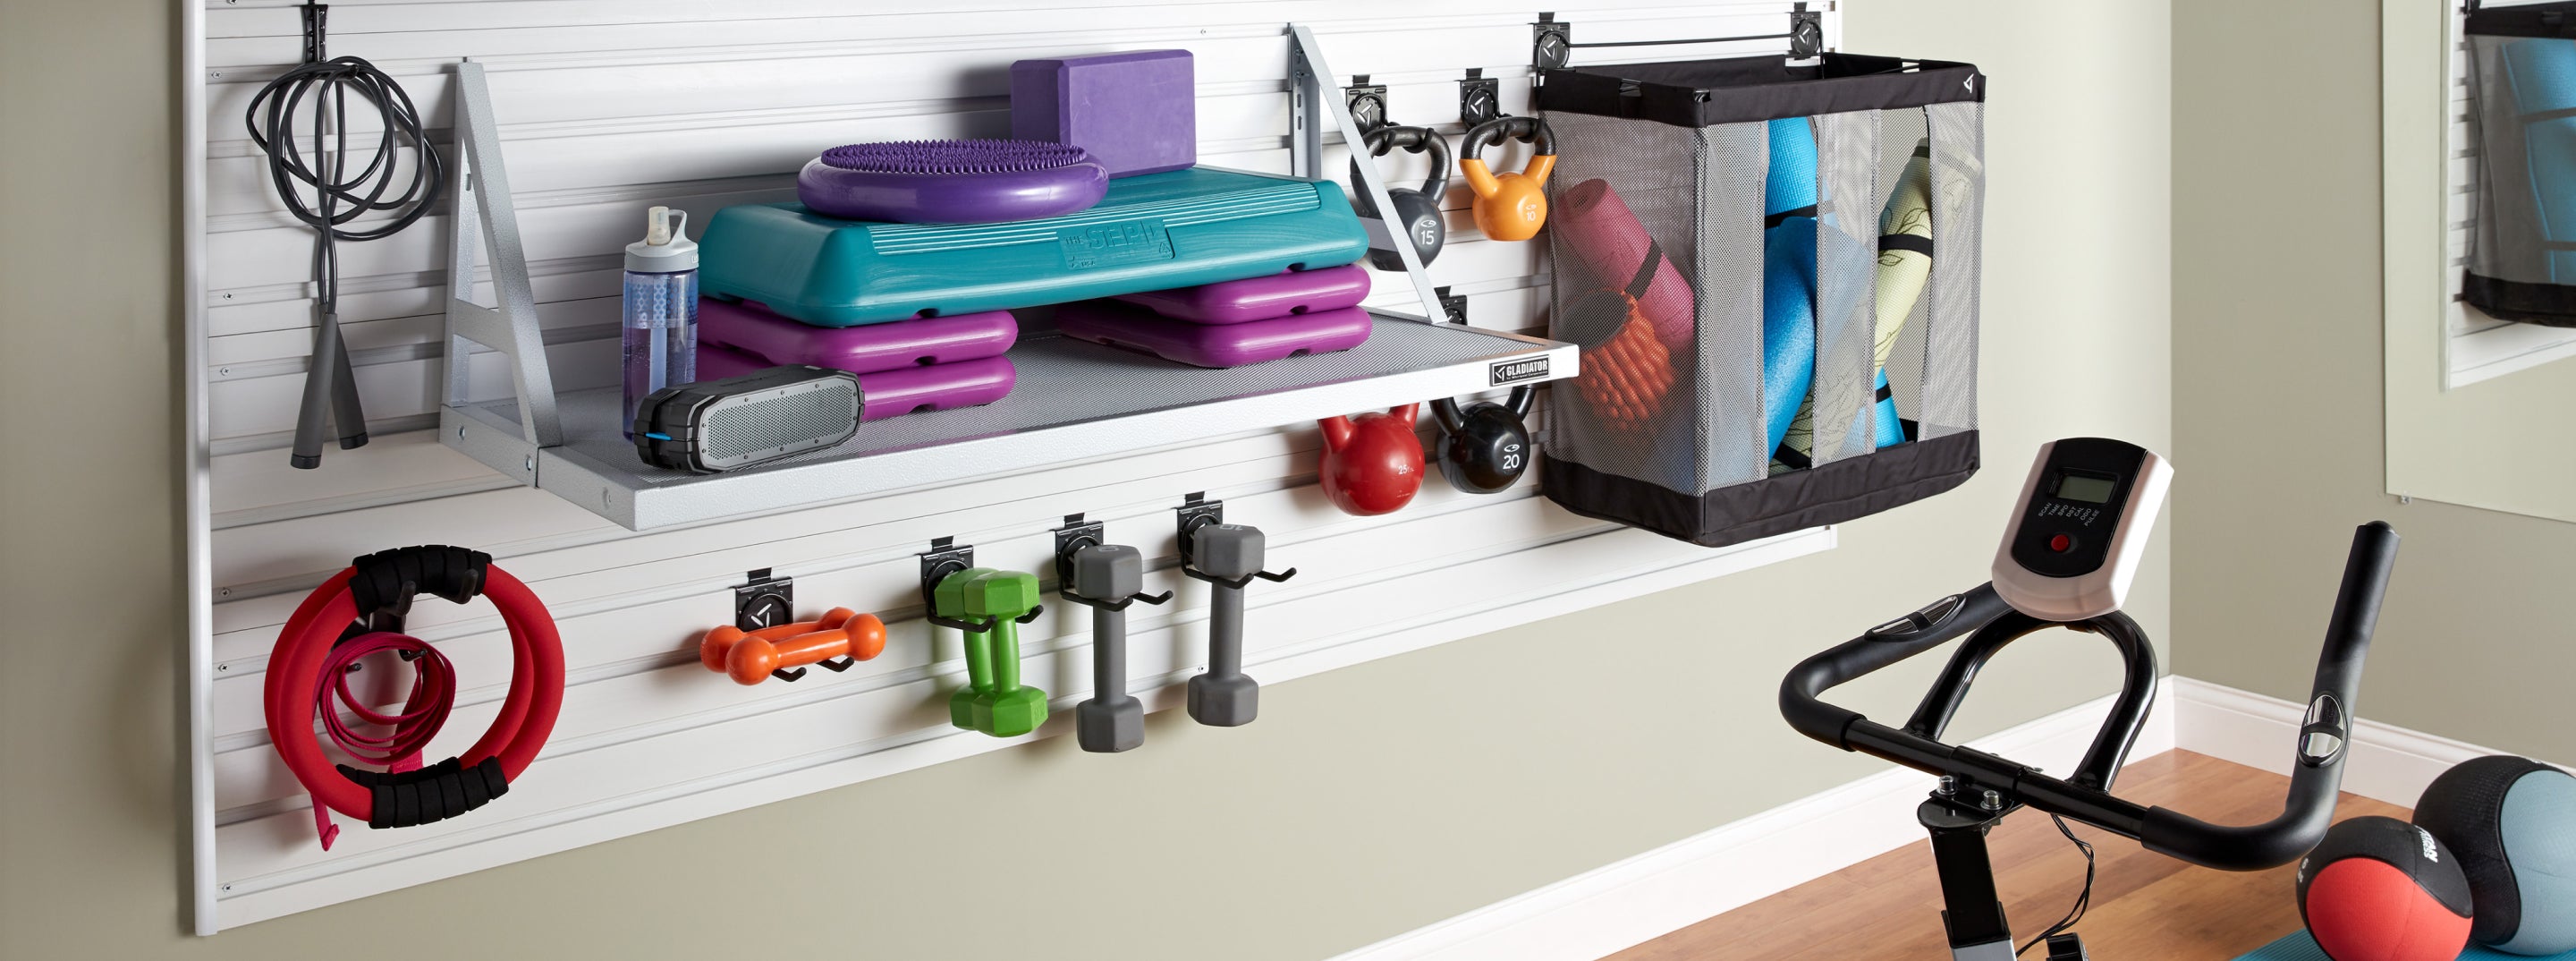 A series of Gladiator brand wall storage holding dumbbells, yoga mats, kettlebells, and other gym and fitness equipment.